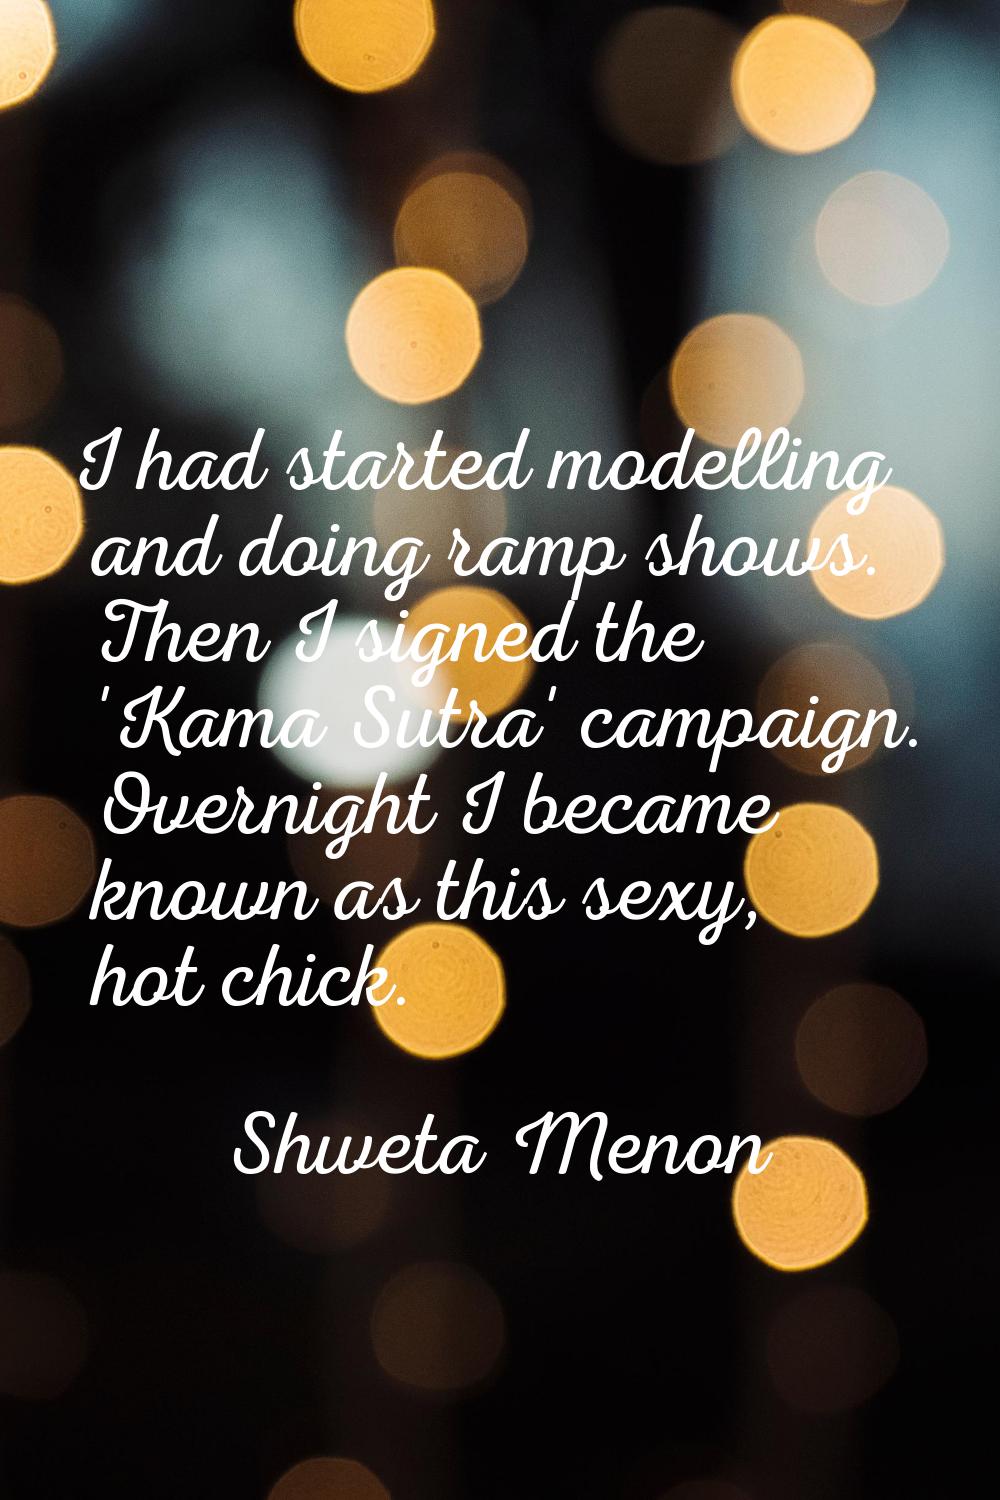 I had started modelling and doing ramp shows. Then I signed the 'Kama Sutra' campaign. Overnight I 